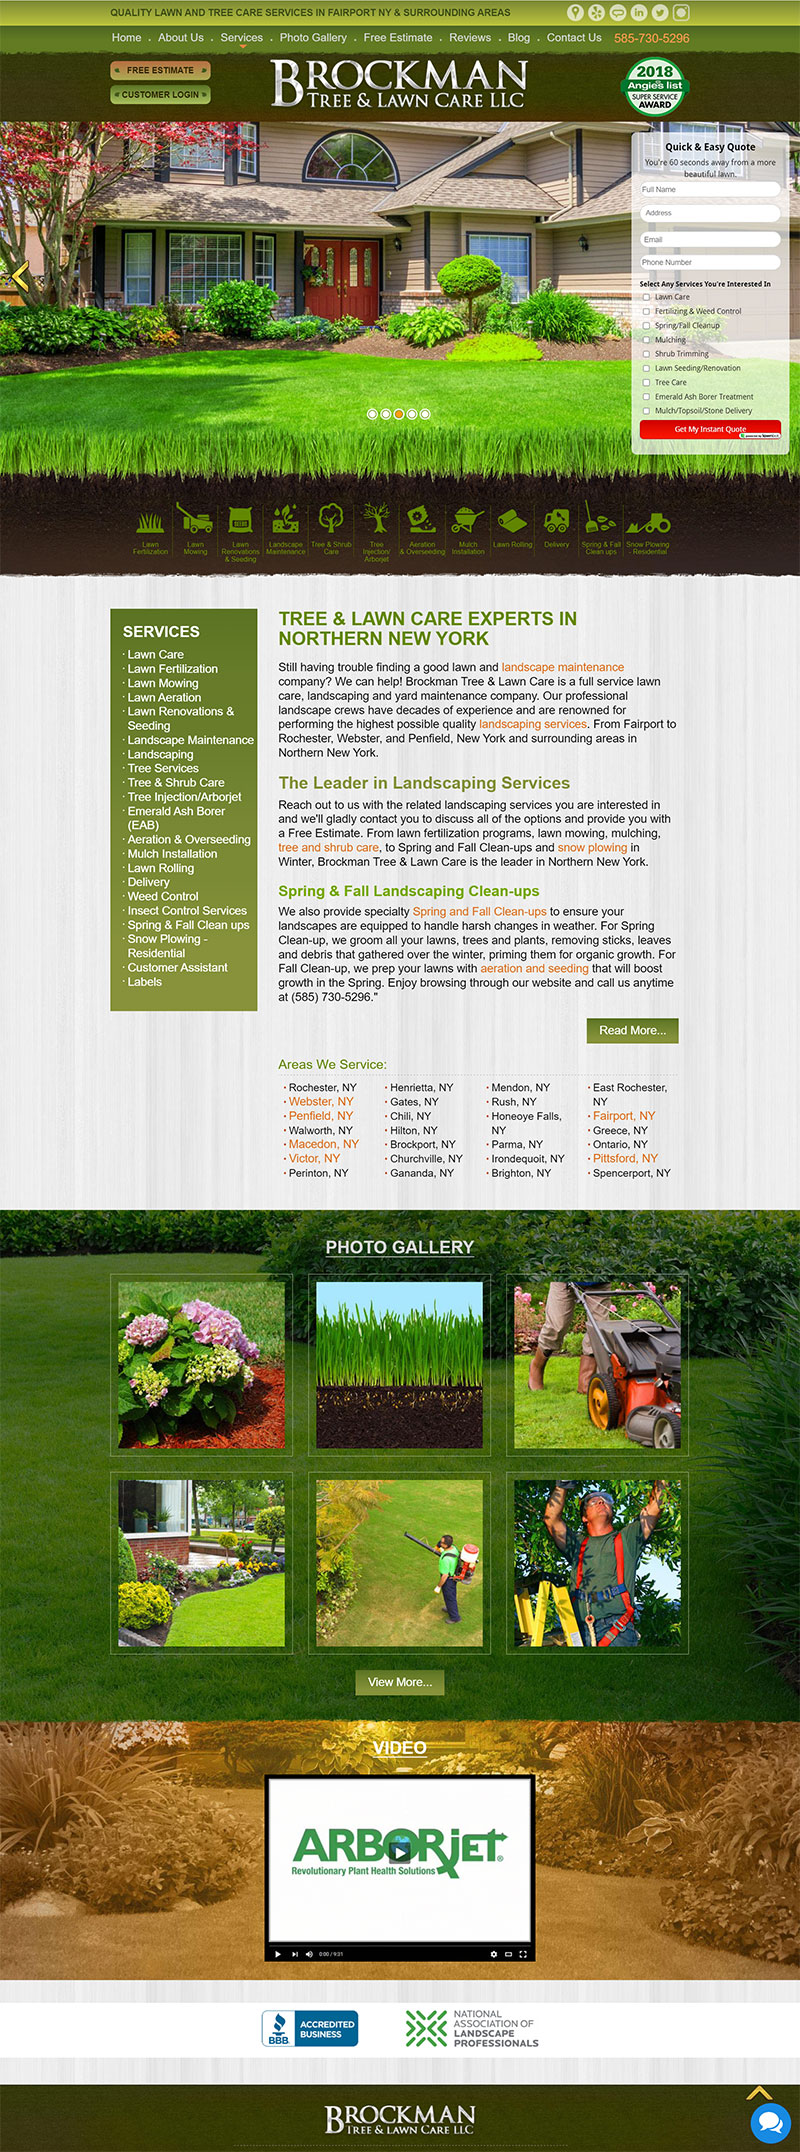 Lawn Care Business Plan Sample